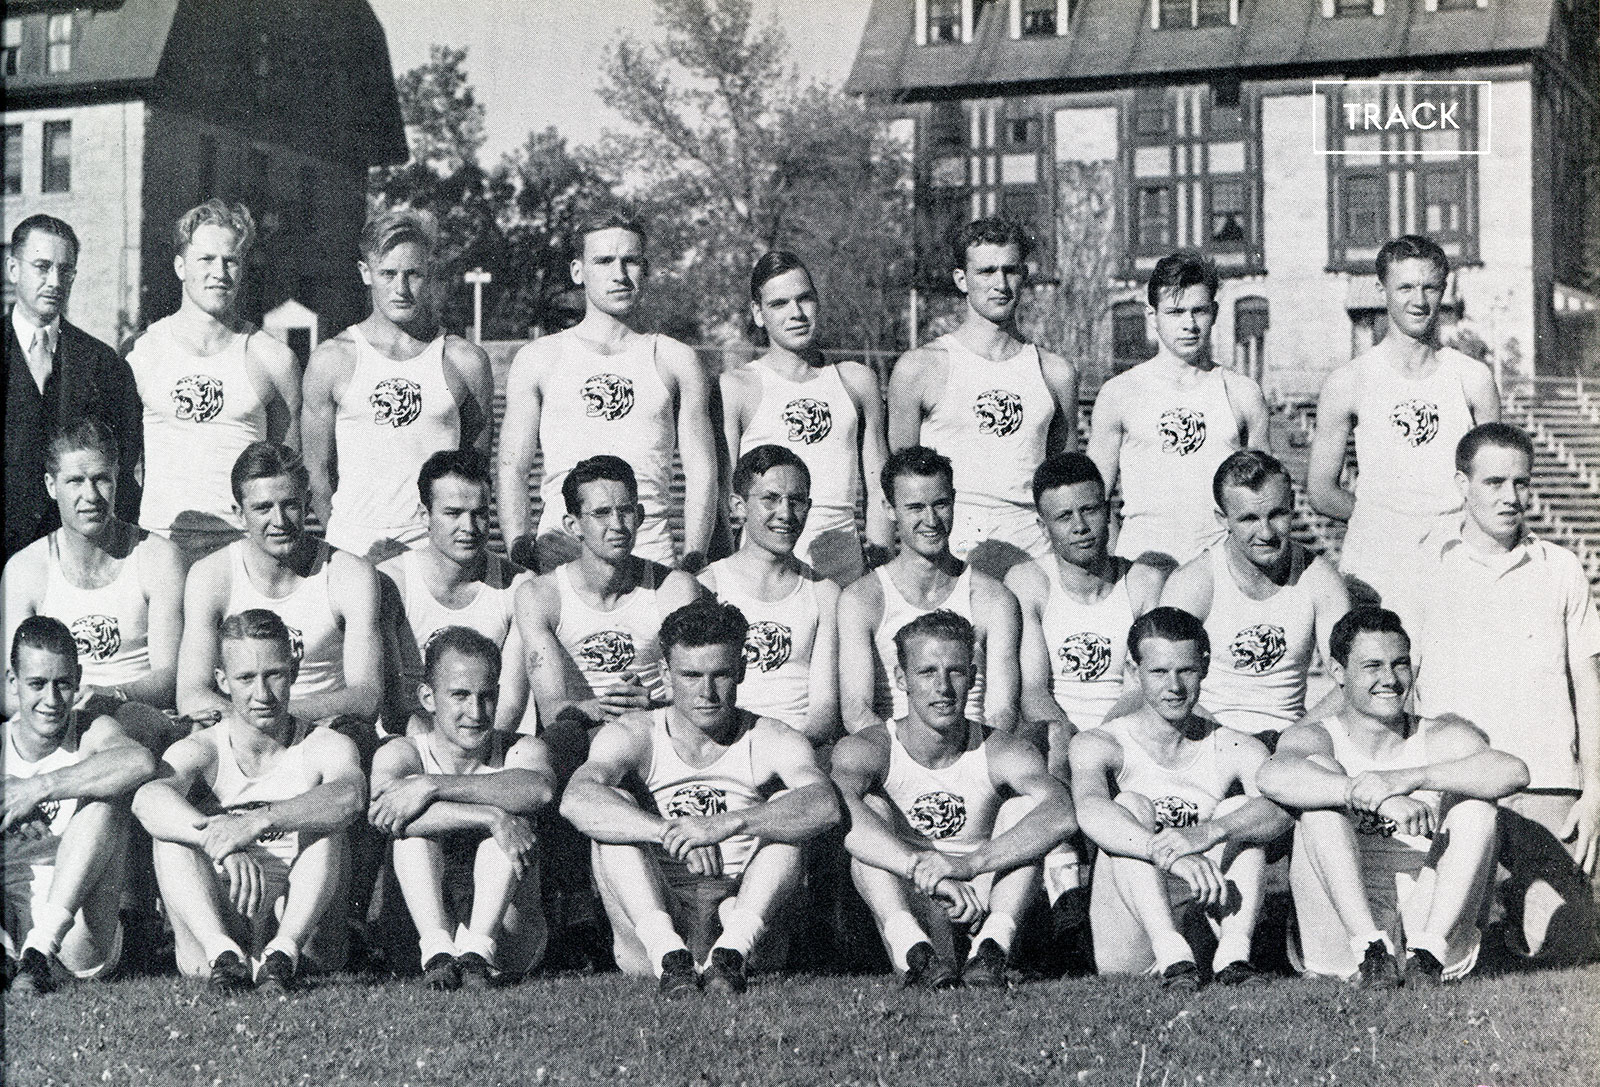 The 1940 Colorado College Varsity Track team <span class="cc-gallery-credit"></span>